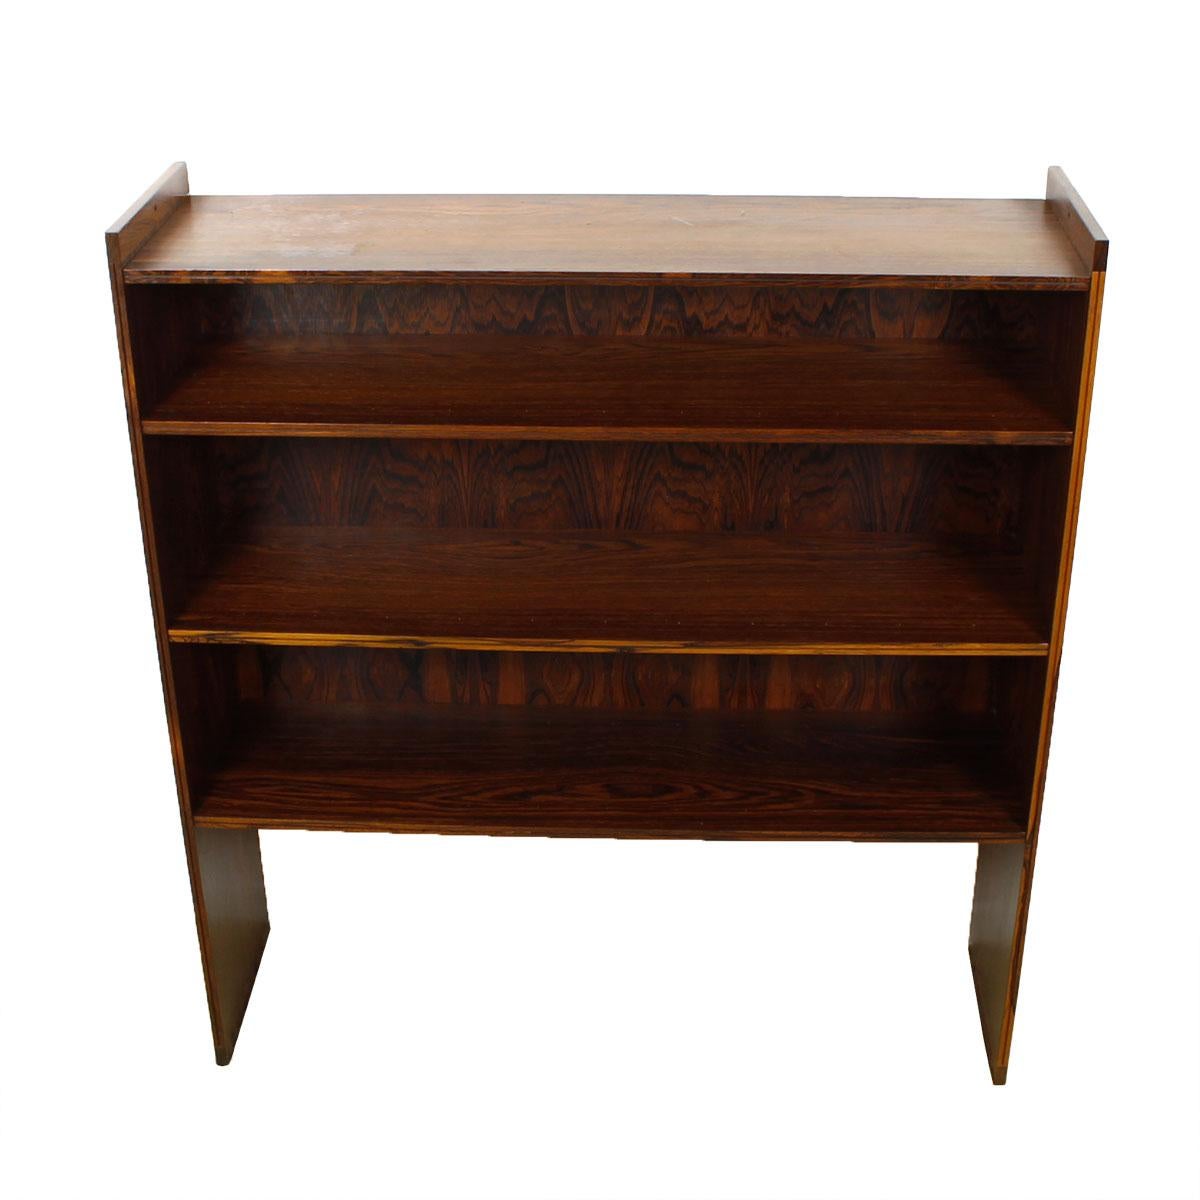 Royal Danish Embassy Slender-Edged Bookcase by Grete Jalk in Brazilian Rosewood In Good Condition For Sale In Kensington, MD